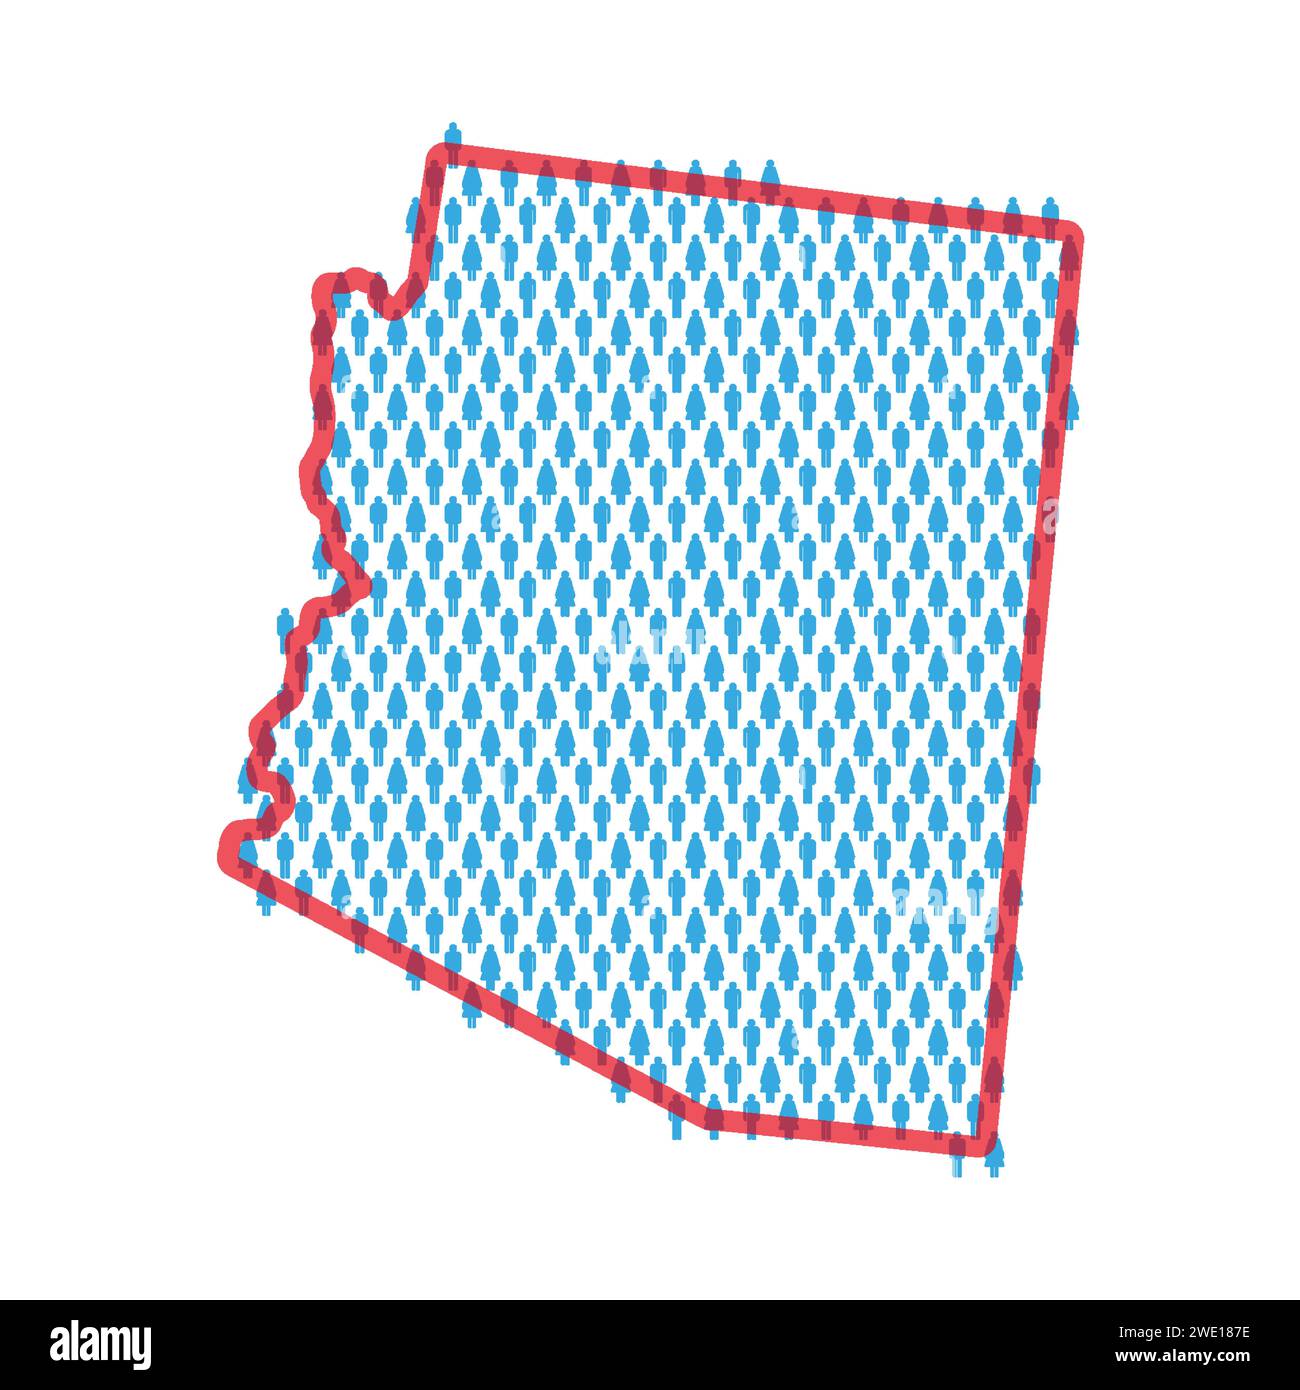 Arizona population map. Stick figures people map with bold red translucent state border. Pattern of men and women icons. Isolated vector illustration. Stock Vector